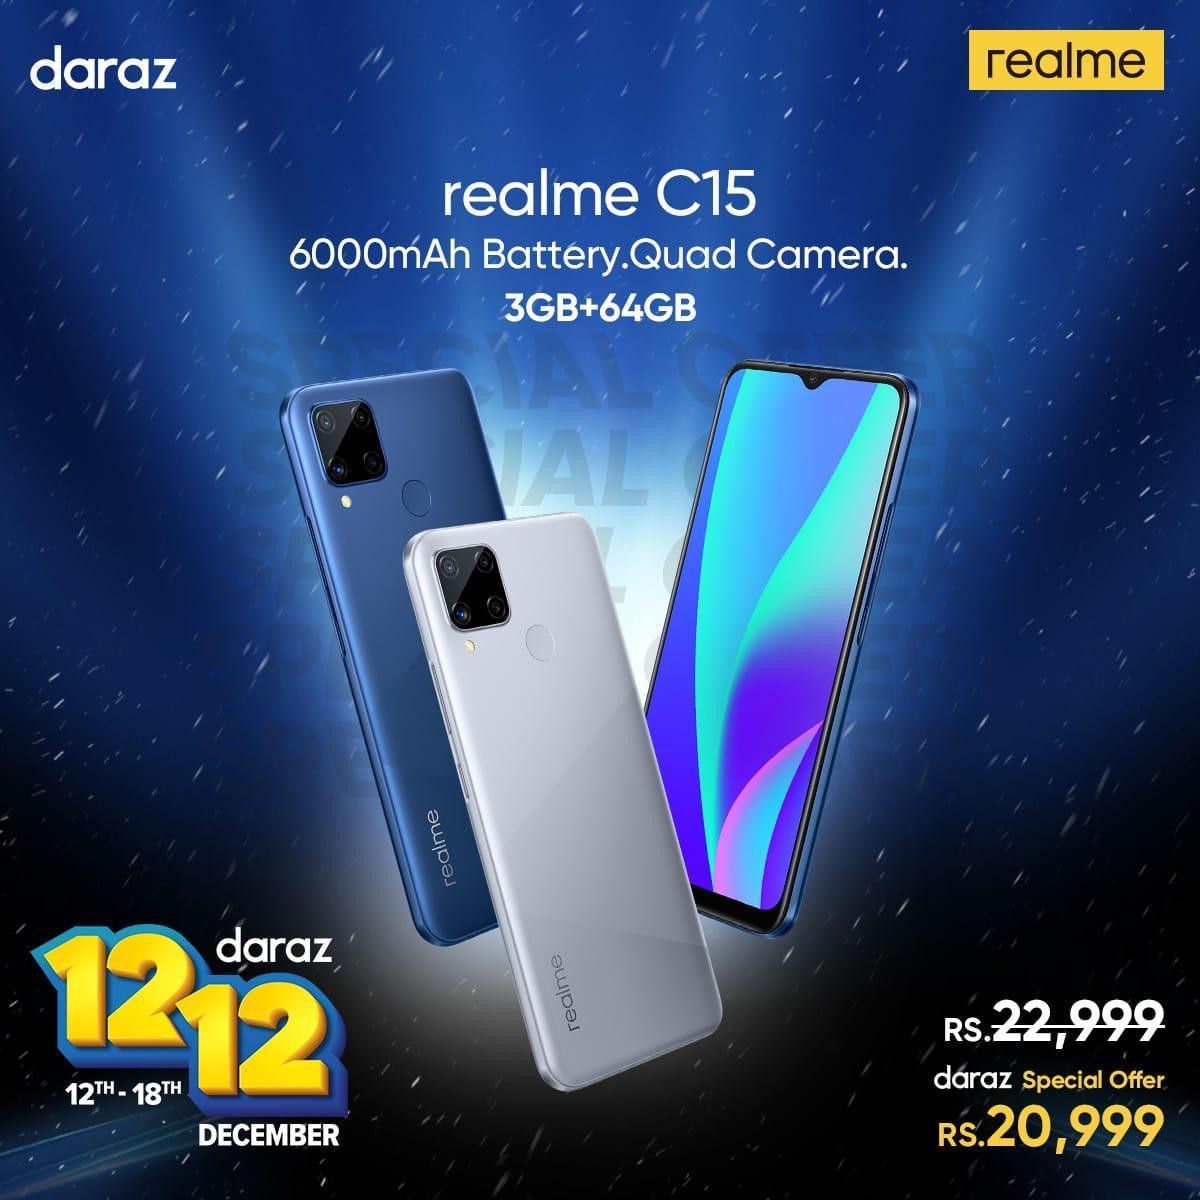 realme and Daraz geared up for another Sale Daraz 12 12